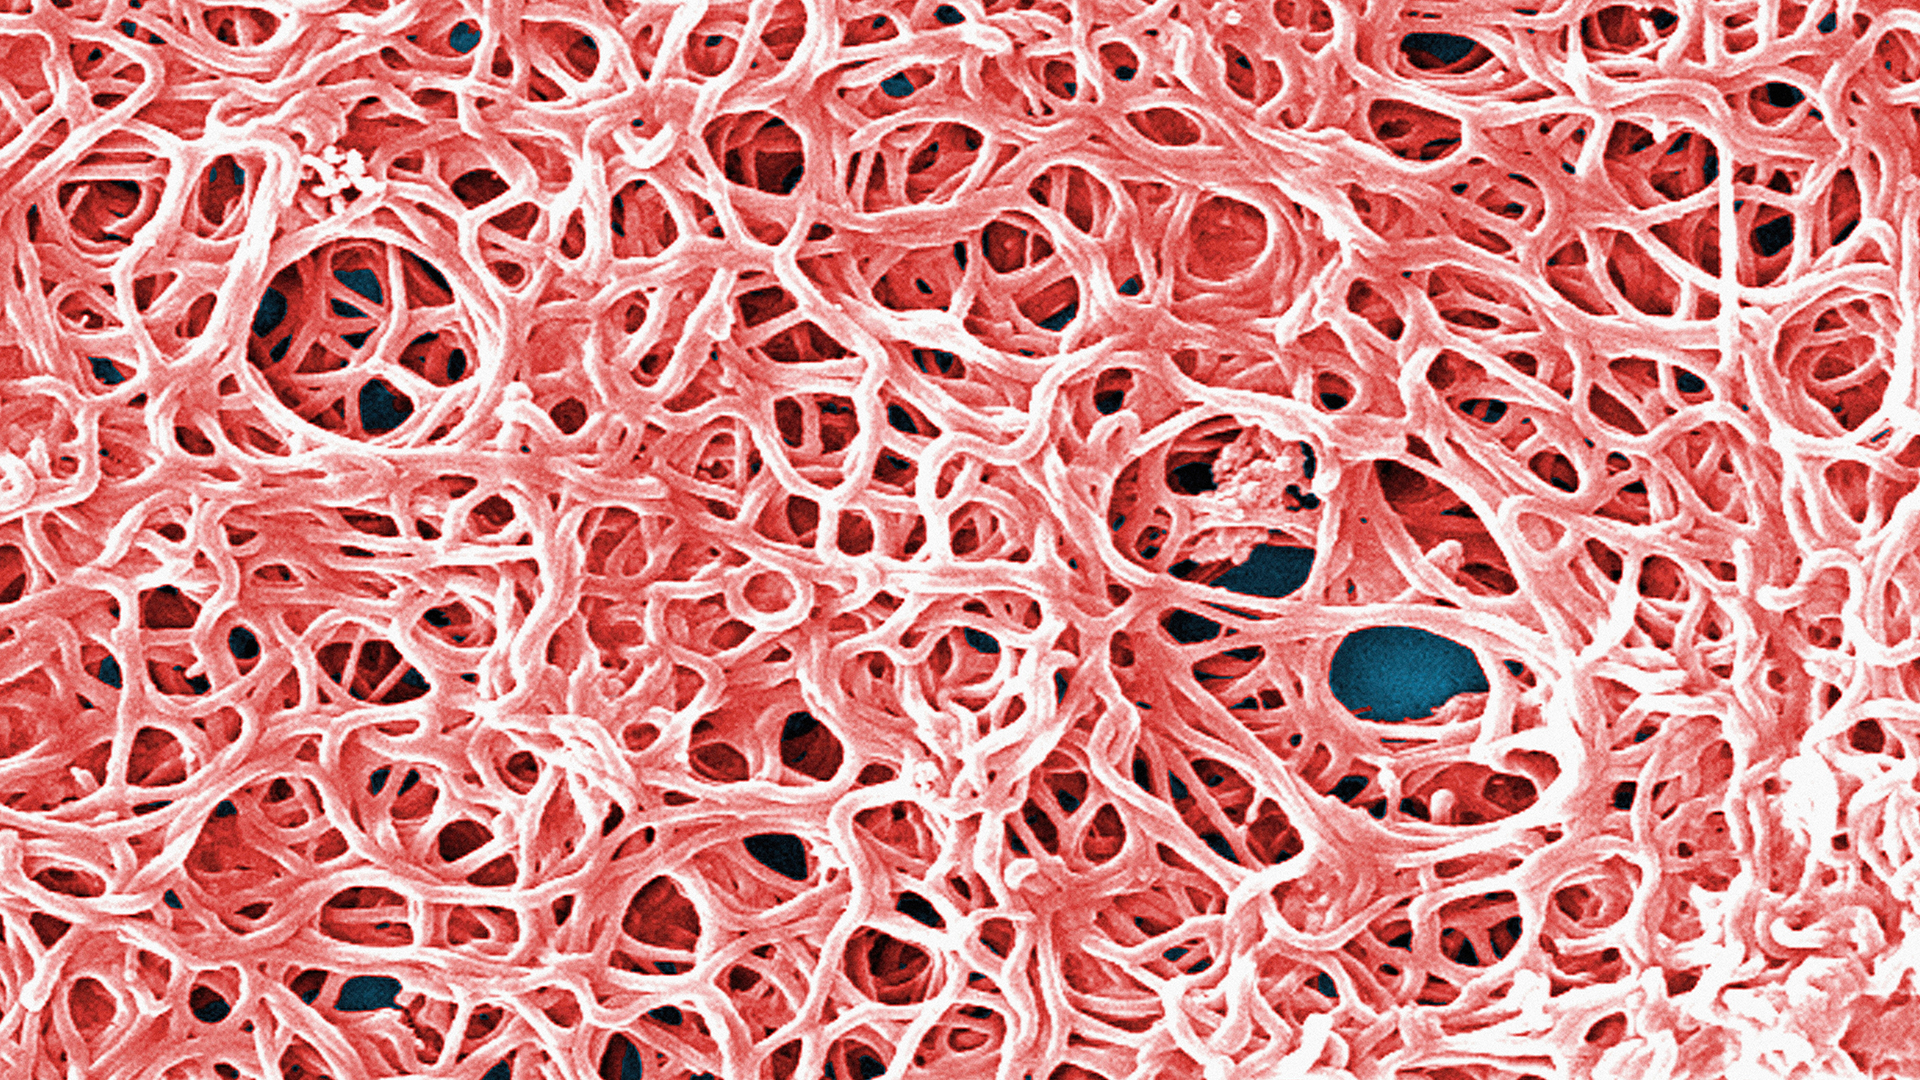 image of Borrelia burgdorferi bacteria growing tangled together like clumps of sticky string